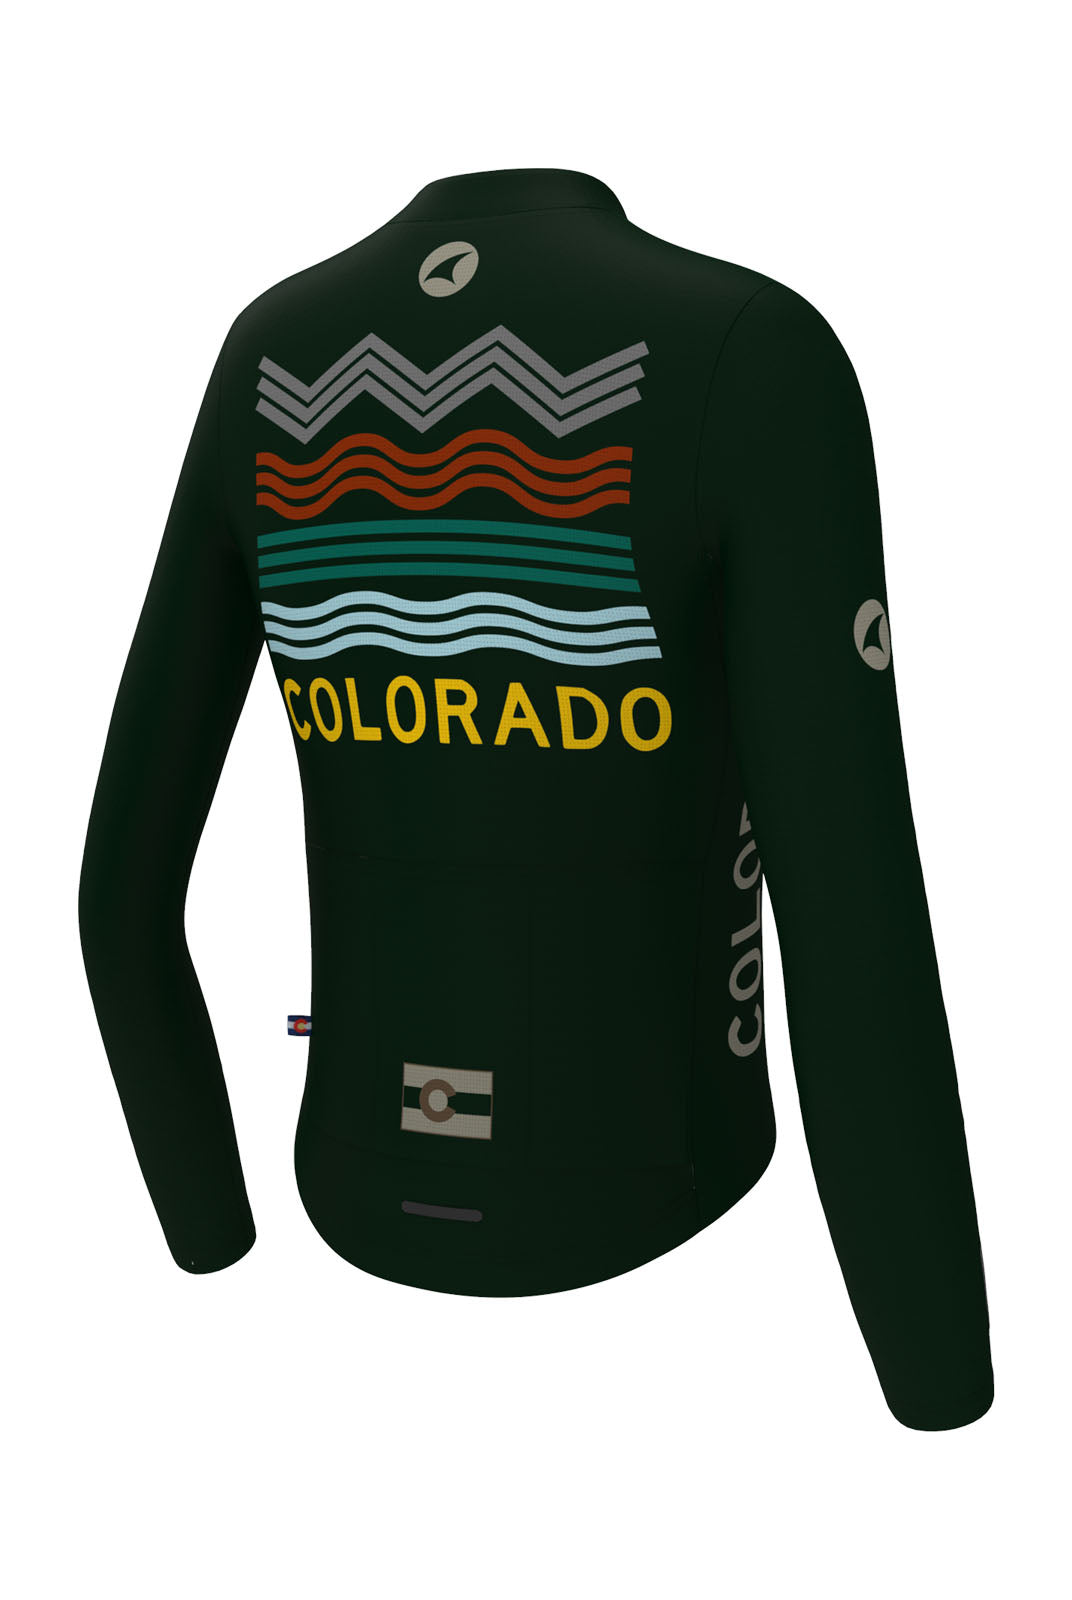 Women's Navy Blue Colorado Long Sleeve Cycling Jersey - Ascent Aero Back View